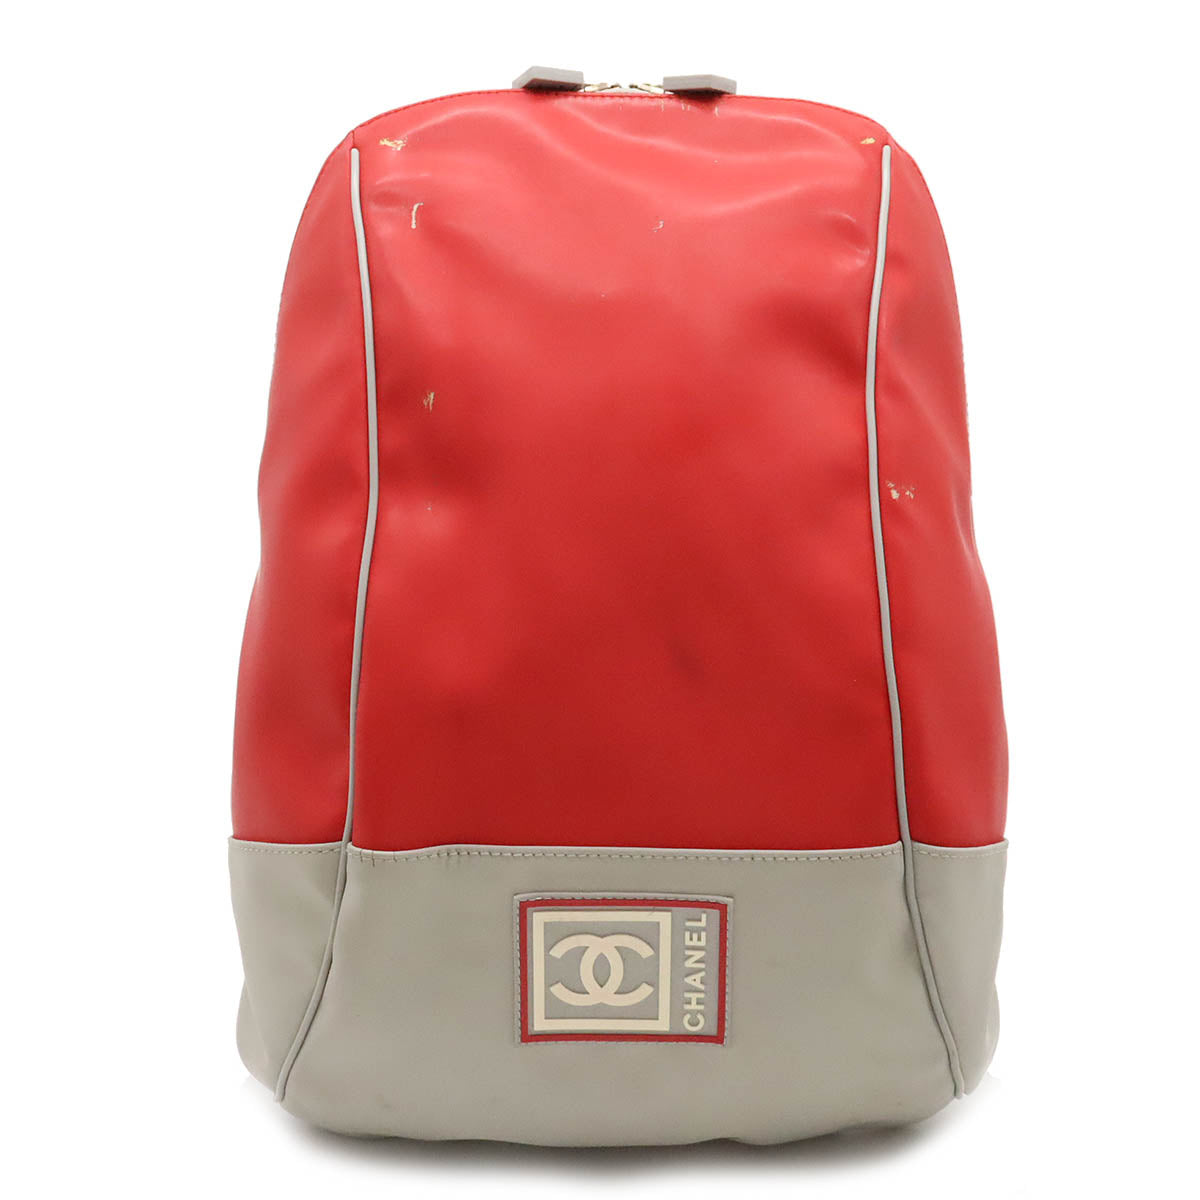 CHANEL CHANEL SPORTS LINE COCOMARK BACKPACK RUCKSACH LAVER Mesh RED RED GREY